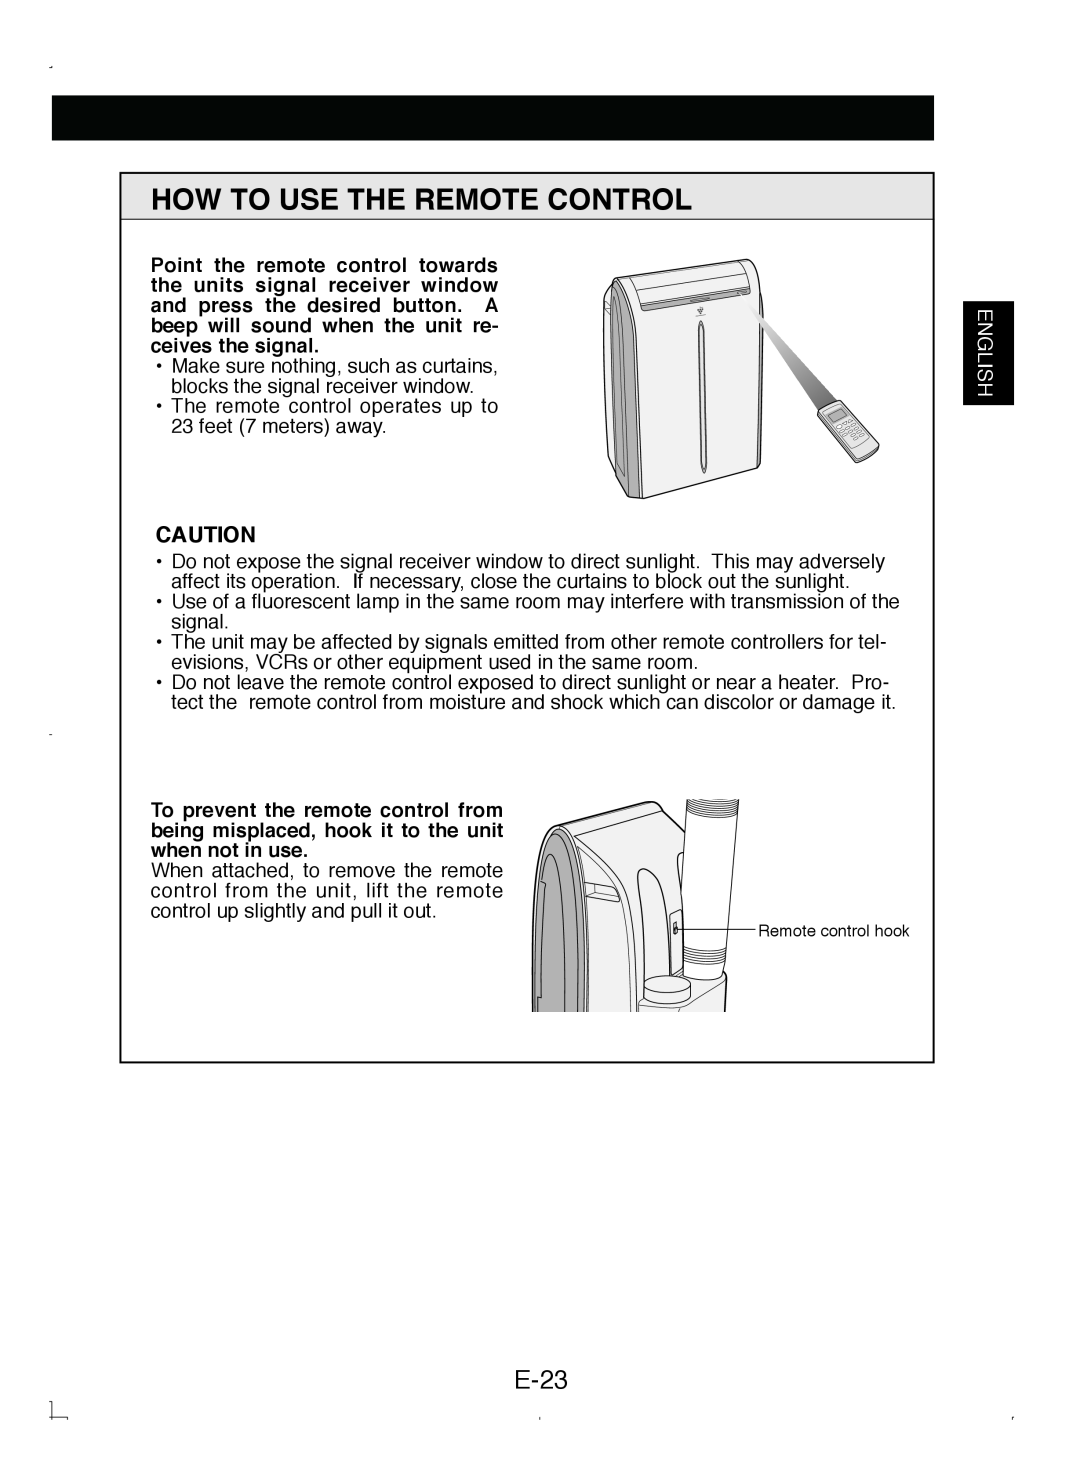 Sony CV-P12PX operation manual How To Use The Remote Control, E-23, English 